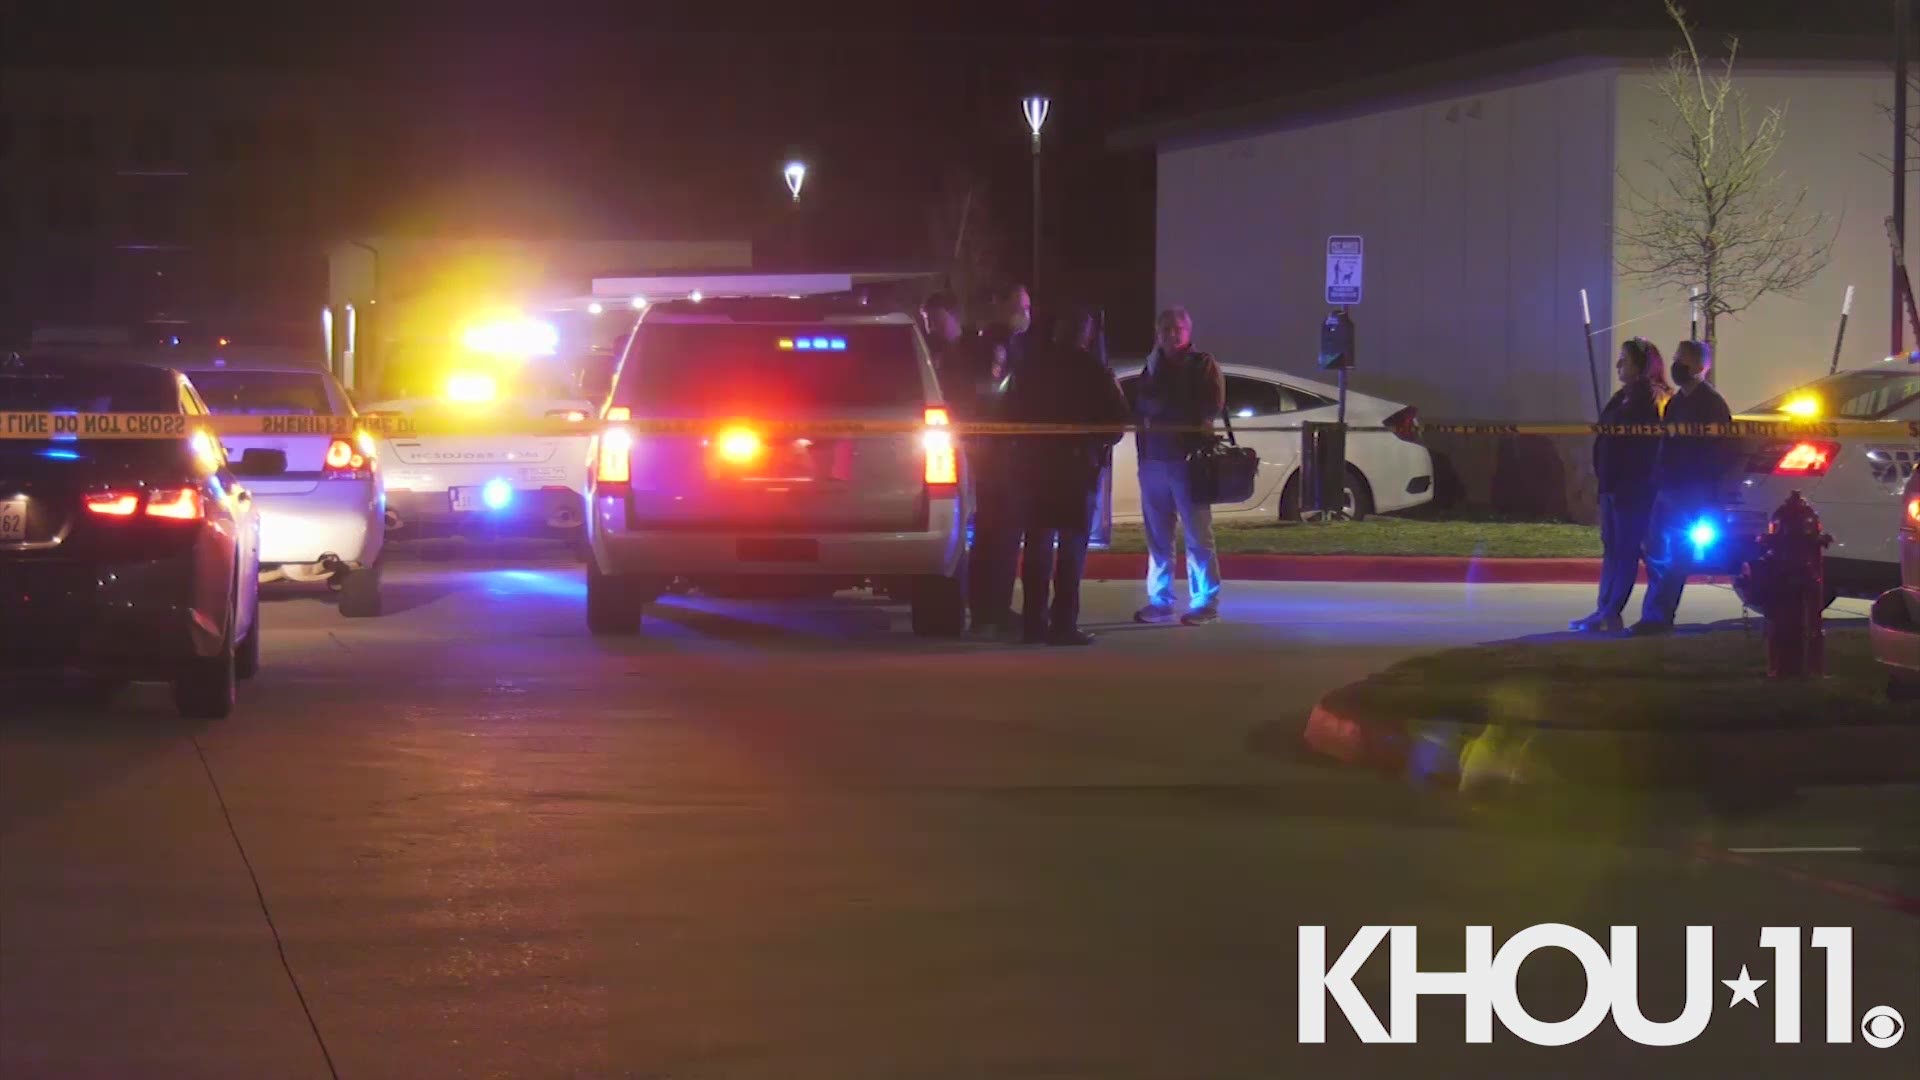 Harris County Sheriff’s deputies are investigating a shooting involving an off-duty deputy Saturday night in Katy.